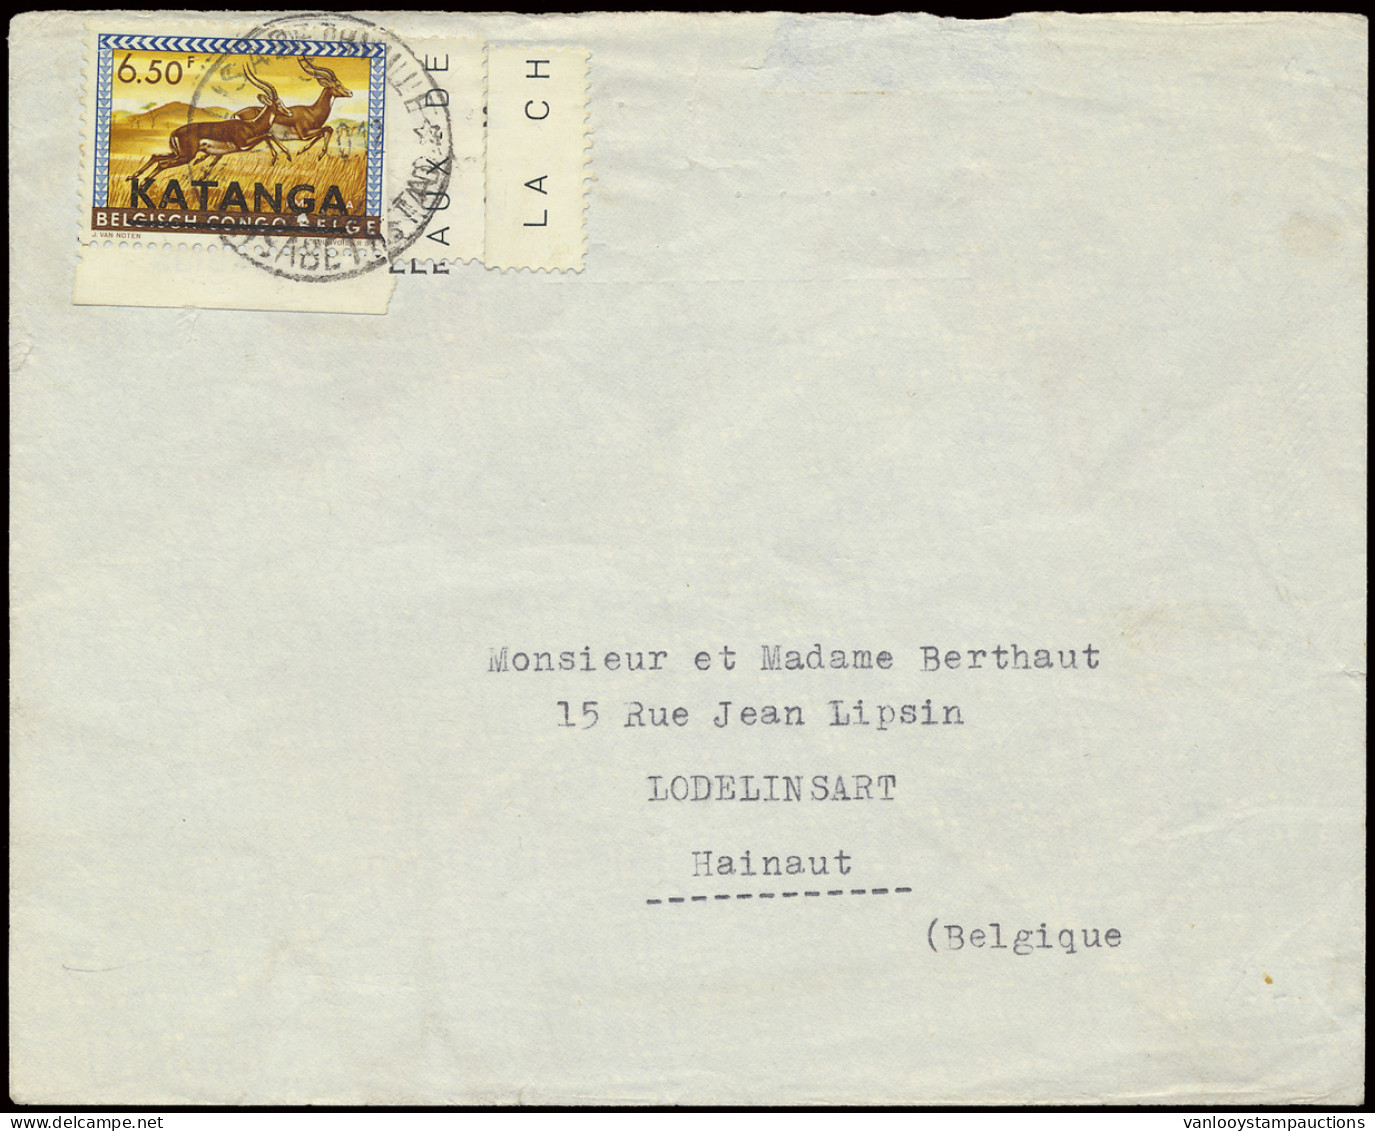 1960 Airmail Cover Franked With OBP N° 15 With Sheet Margin Used As Protection, Sent From Elizabethville-3 (Keach Type 1 - Katanga